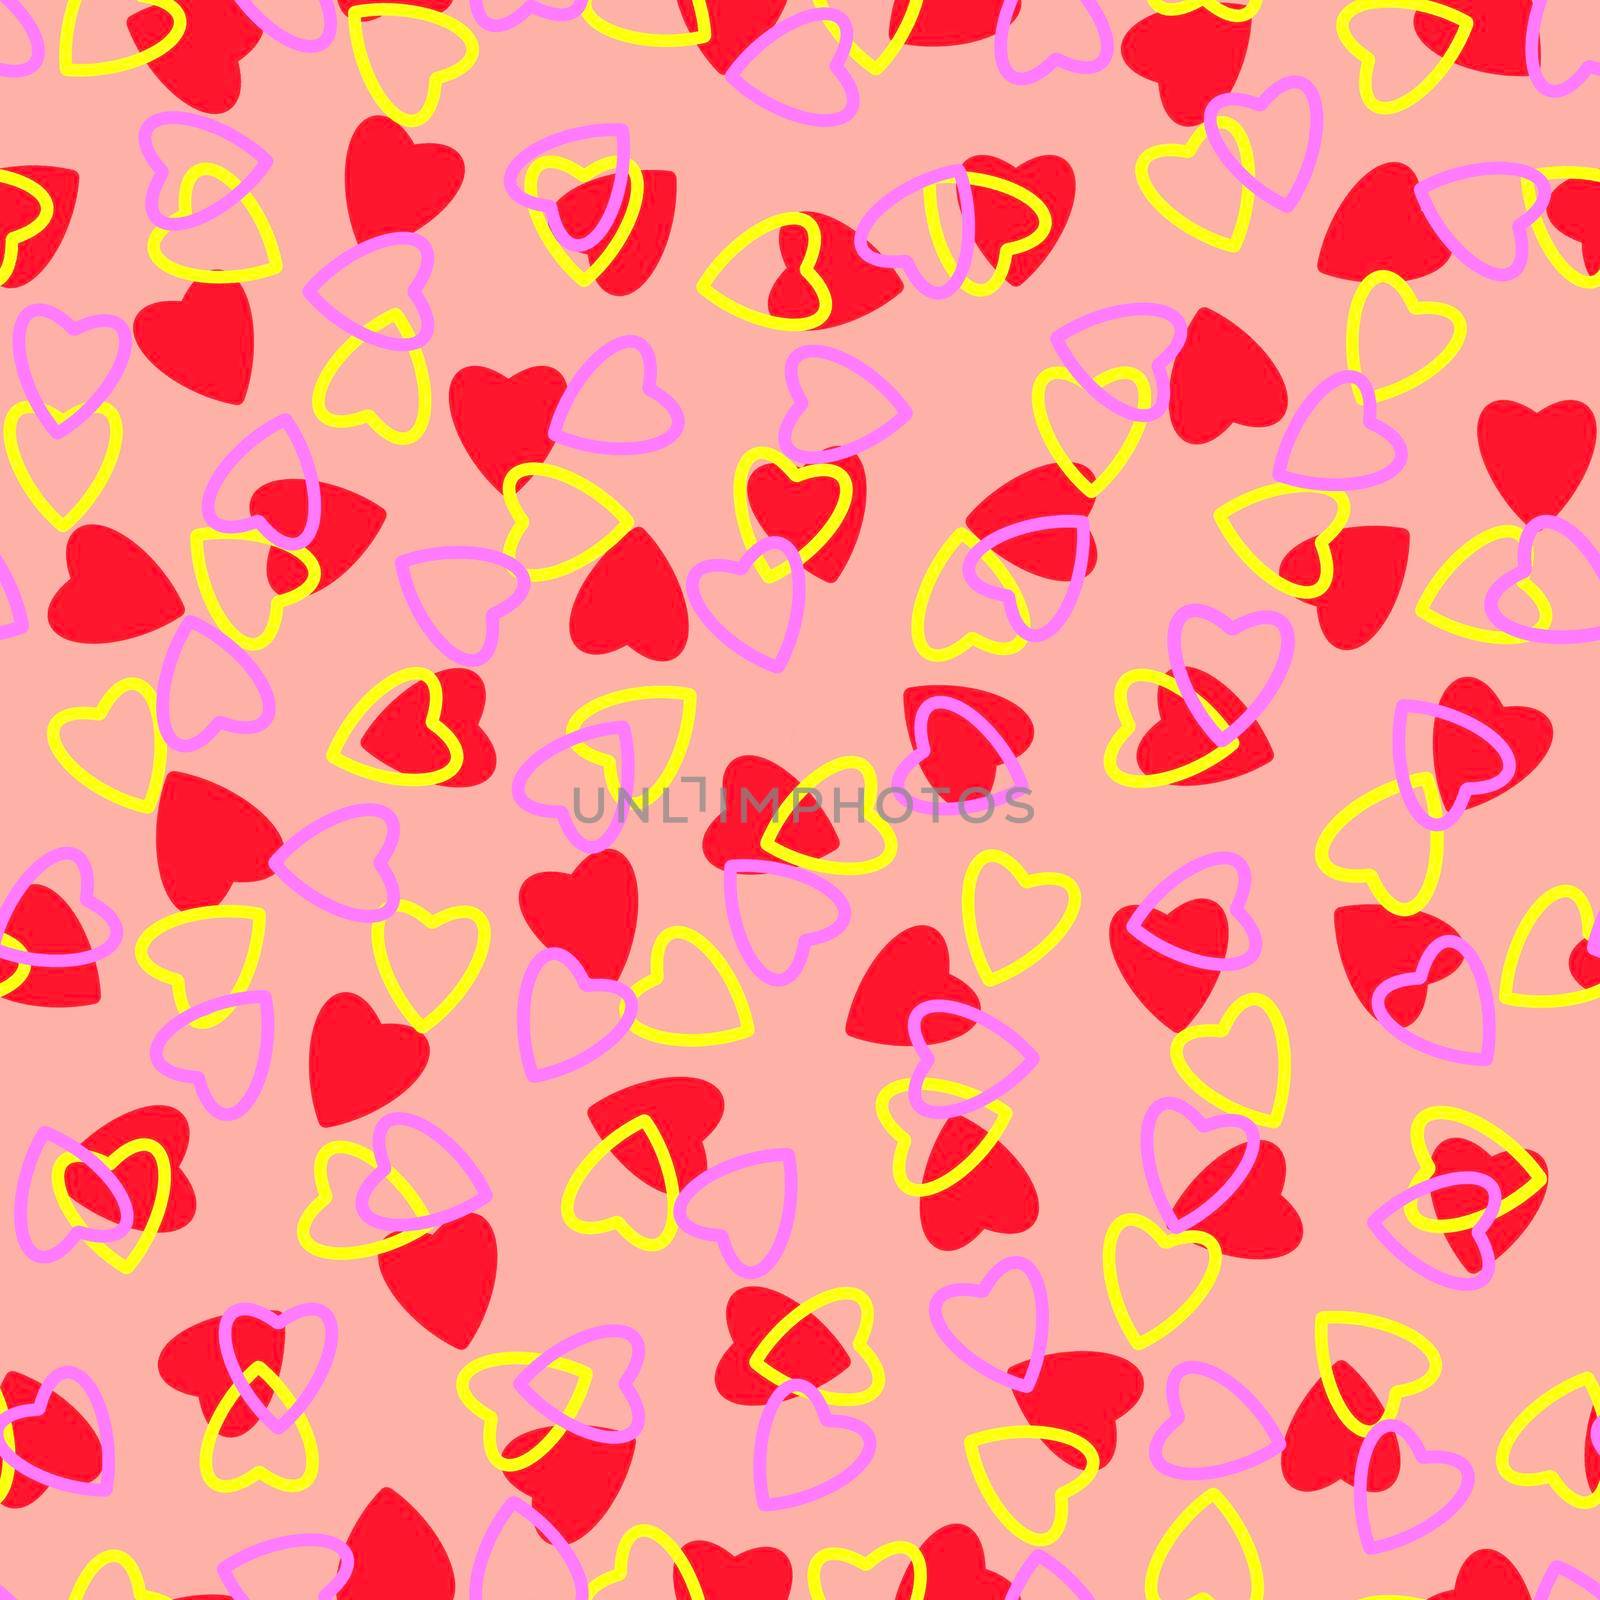 Simple hearts seamless pattern,endless chaotic texture made of tiny heart silhouettes.Valentines,mothers day background.Red,yellow,peach.Great for Easter,wedding,scrapbook,gift wrapping paper,textiles